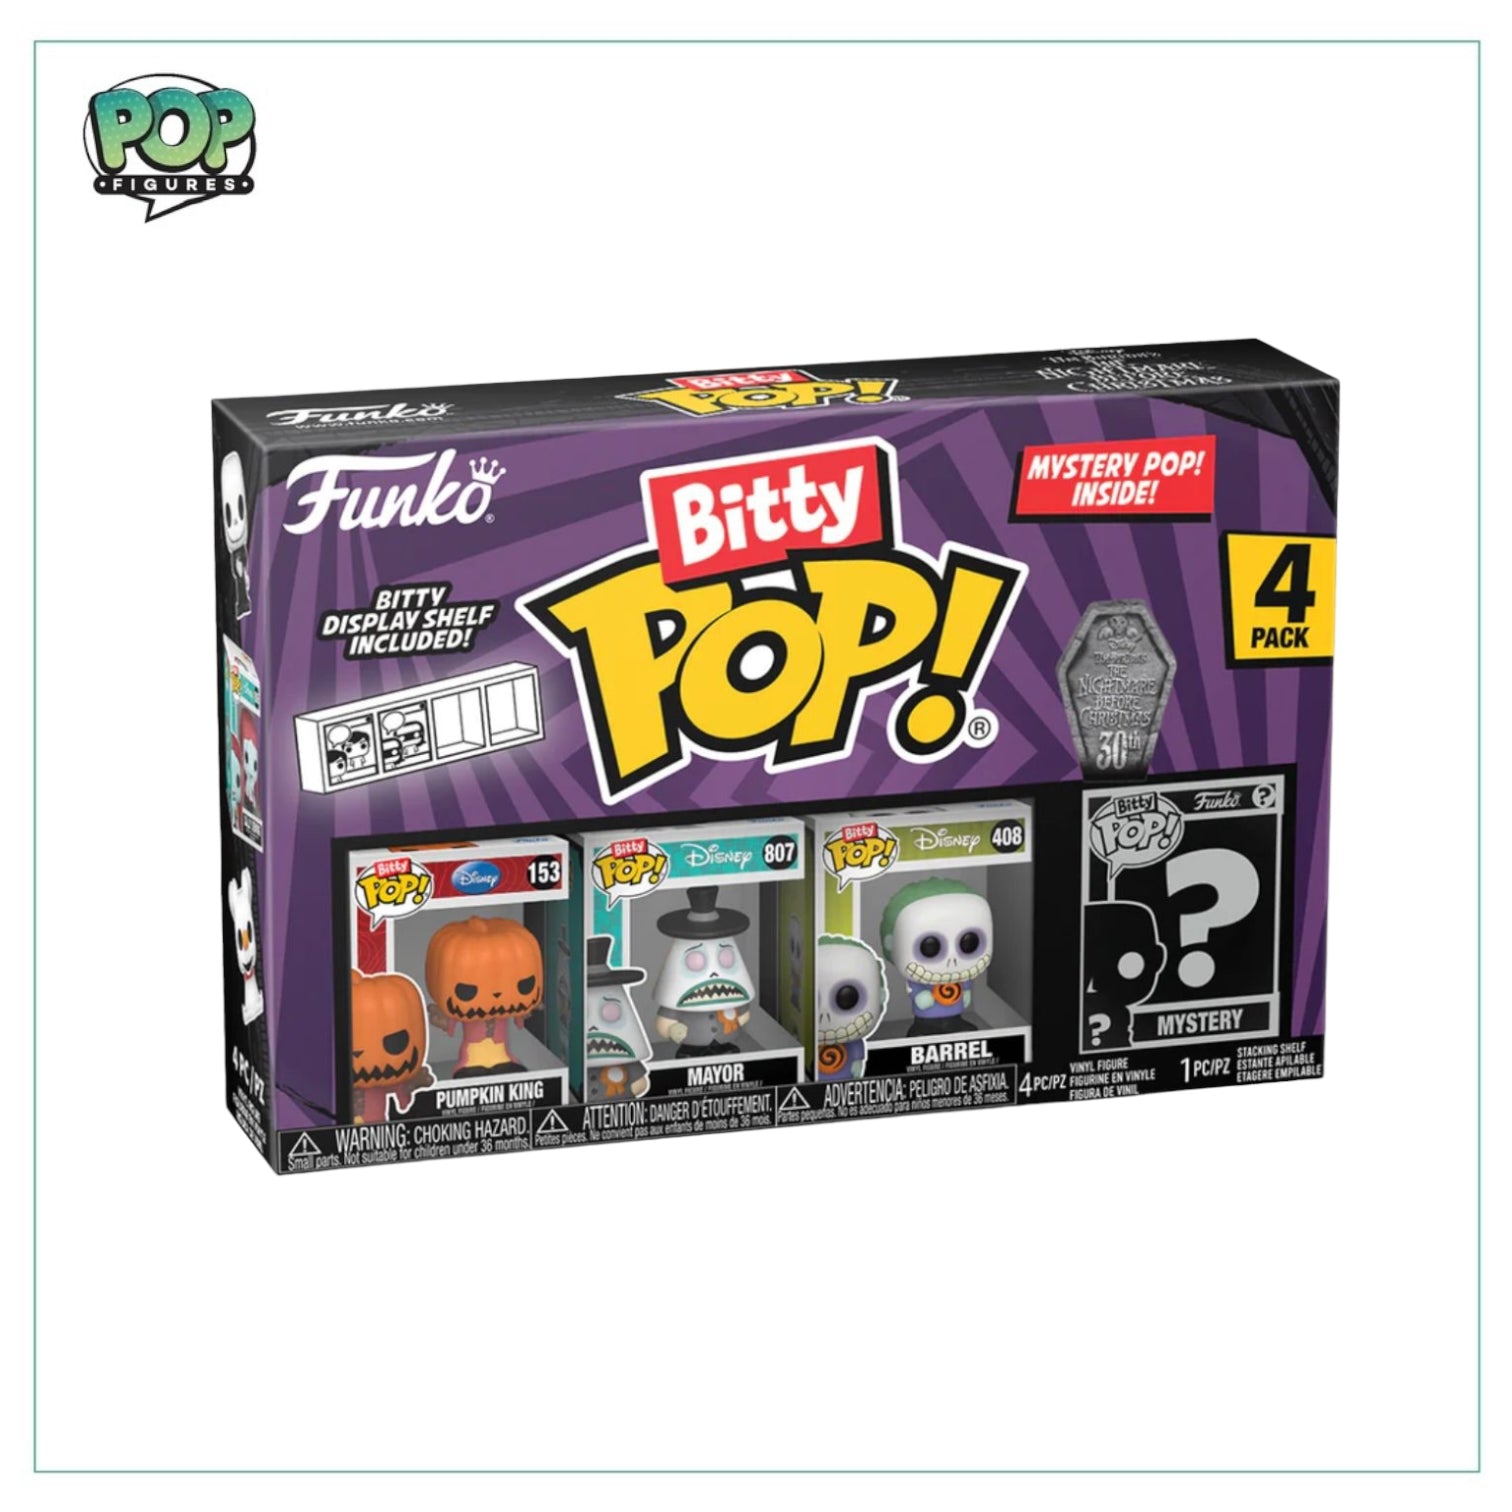 Pumpkin King 4 pack Bitty POP! - The Nightmare before Christmas - Chance of Chase